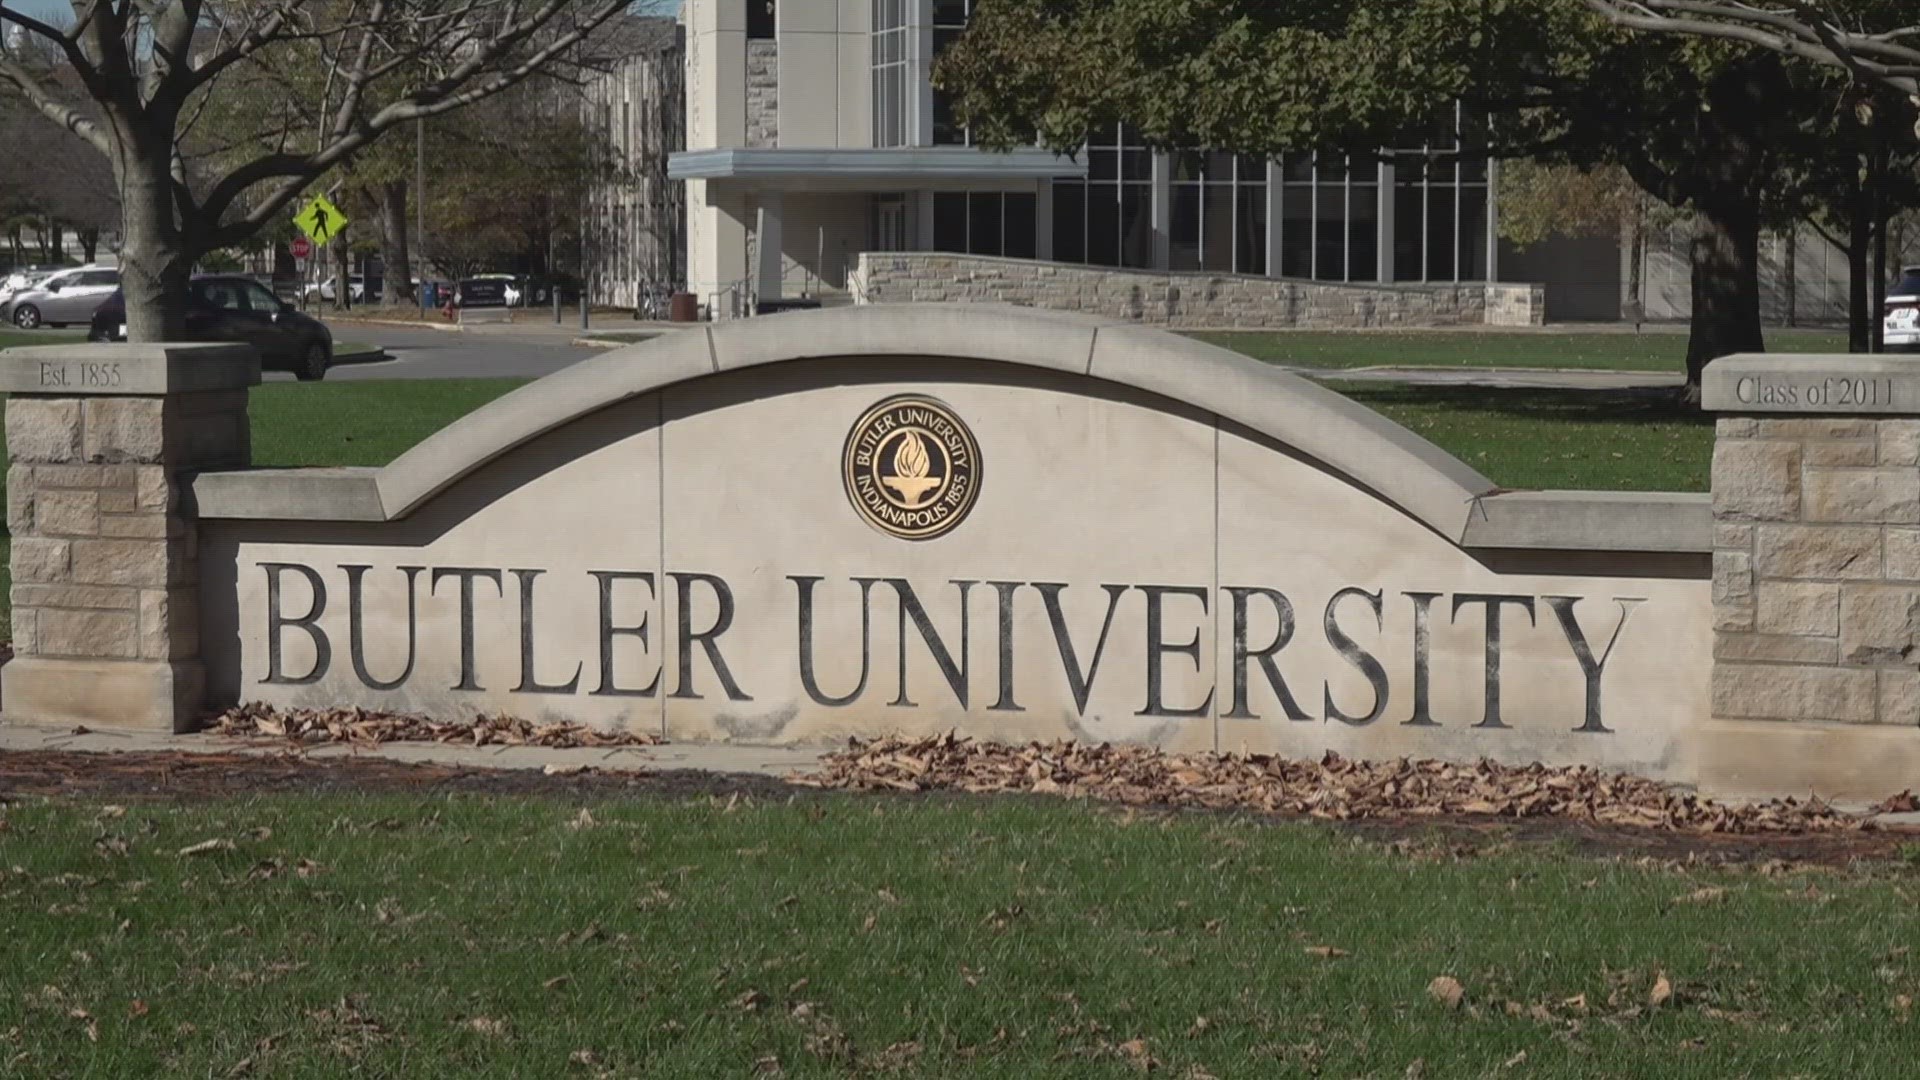 13News reporter Anna Chalker reports from Butler University where the school announced a new two-year degree program.